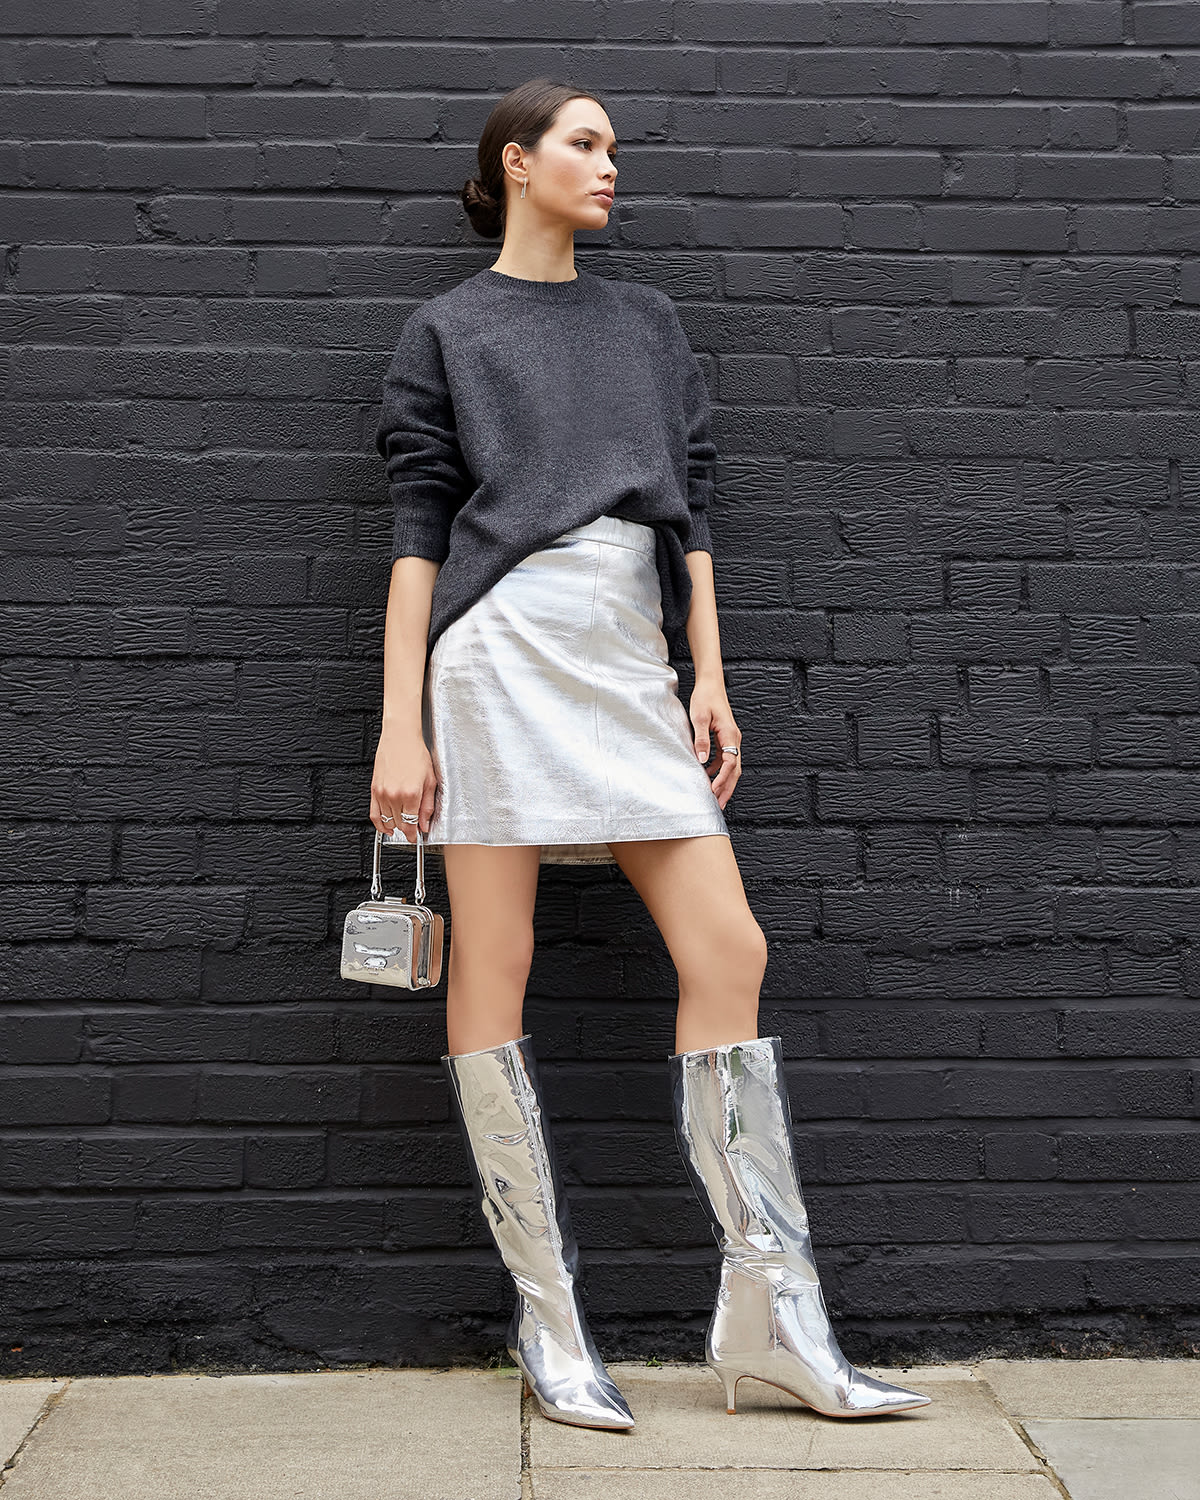 Model wearing Dune London Smooth silver knee high boots and Santerini silver bag